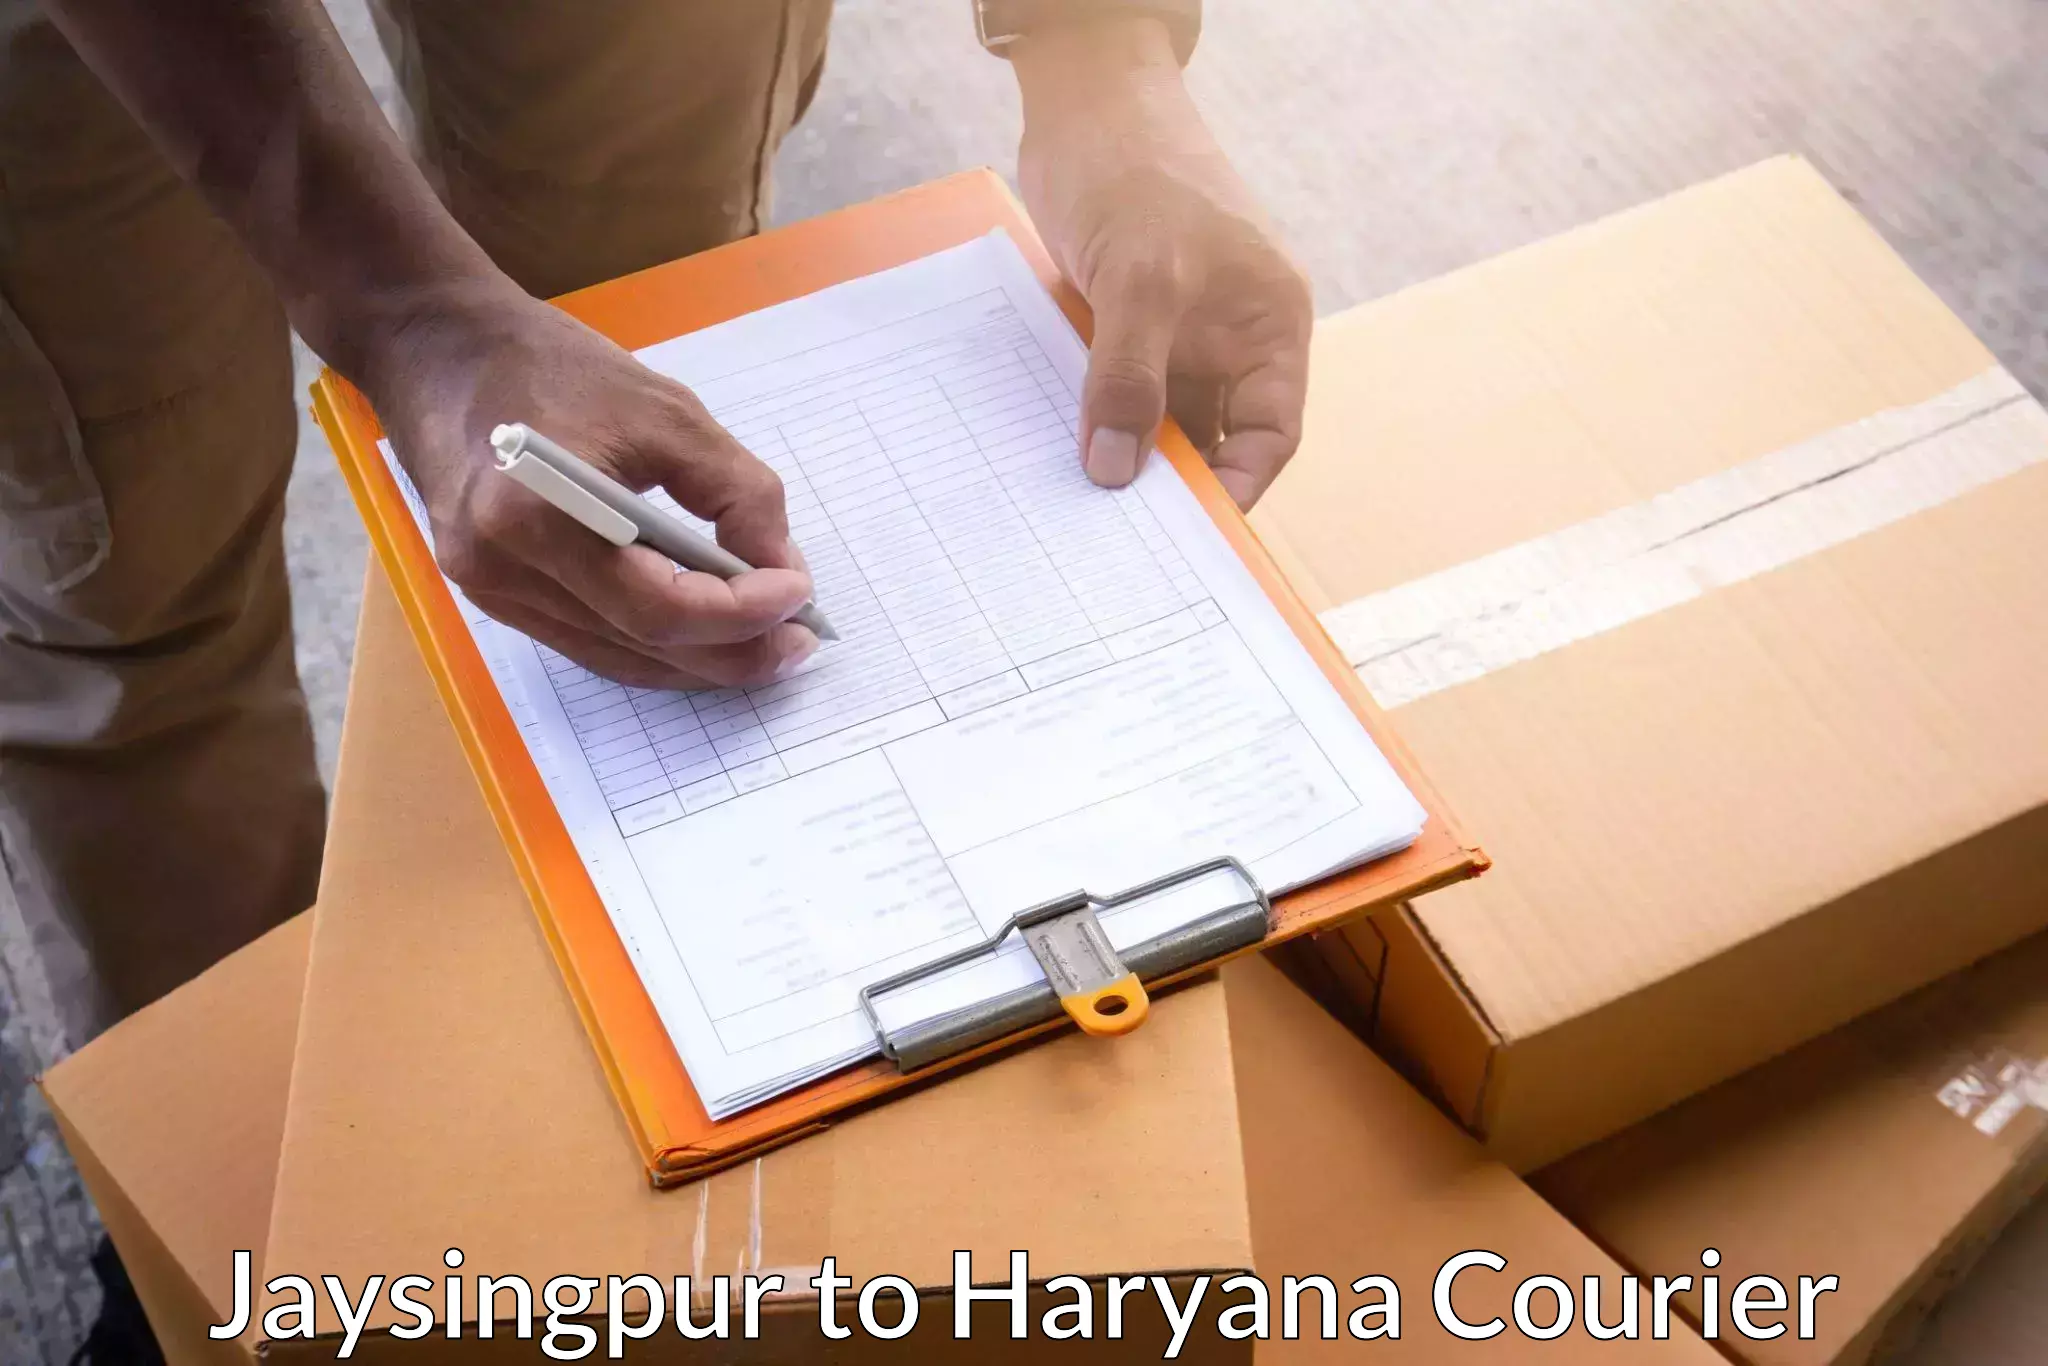 24/7 courier service in Jaysingpur to Siwani